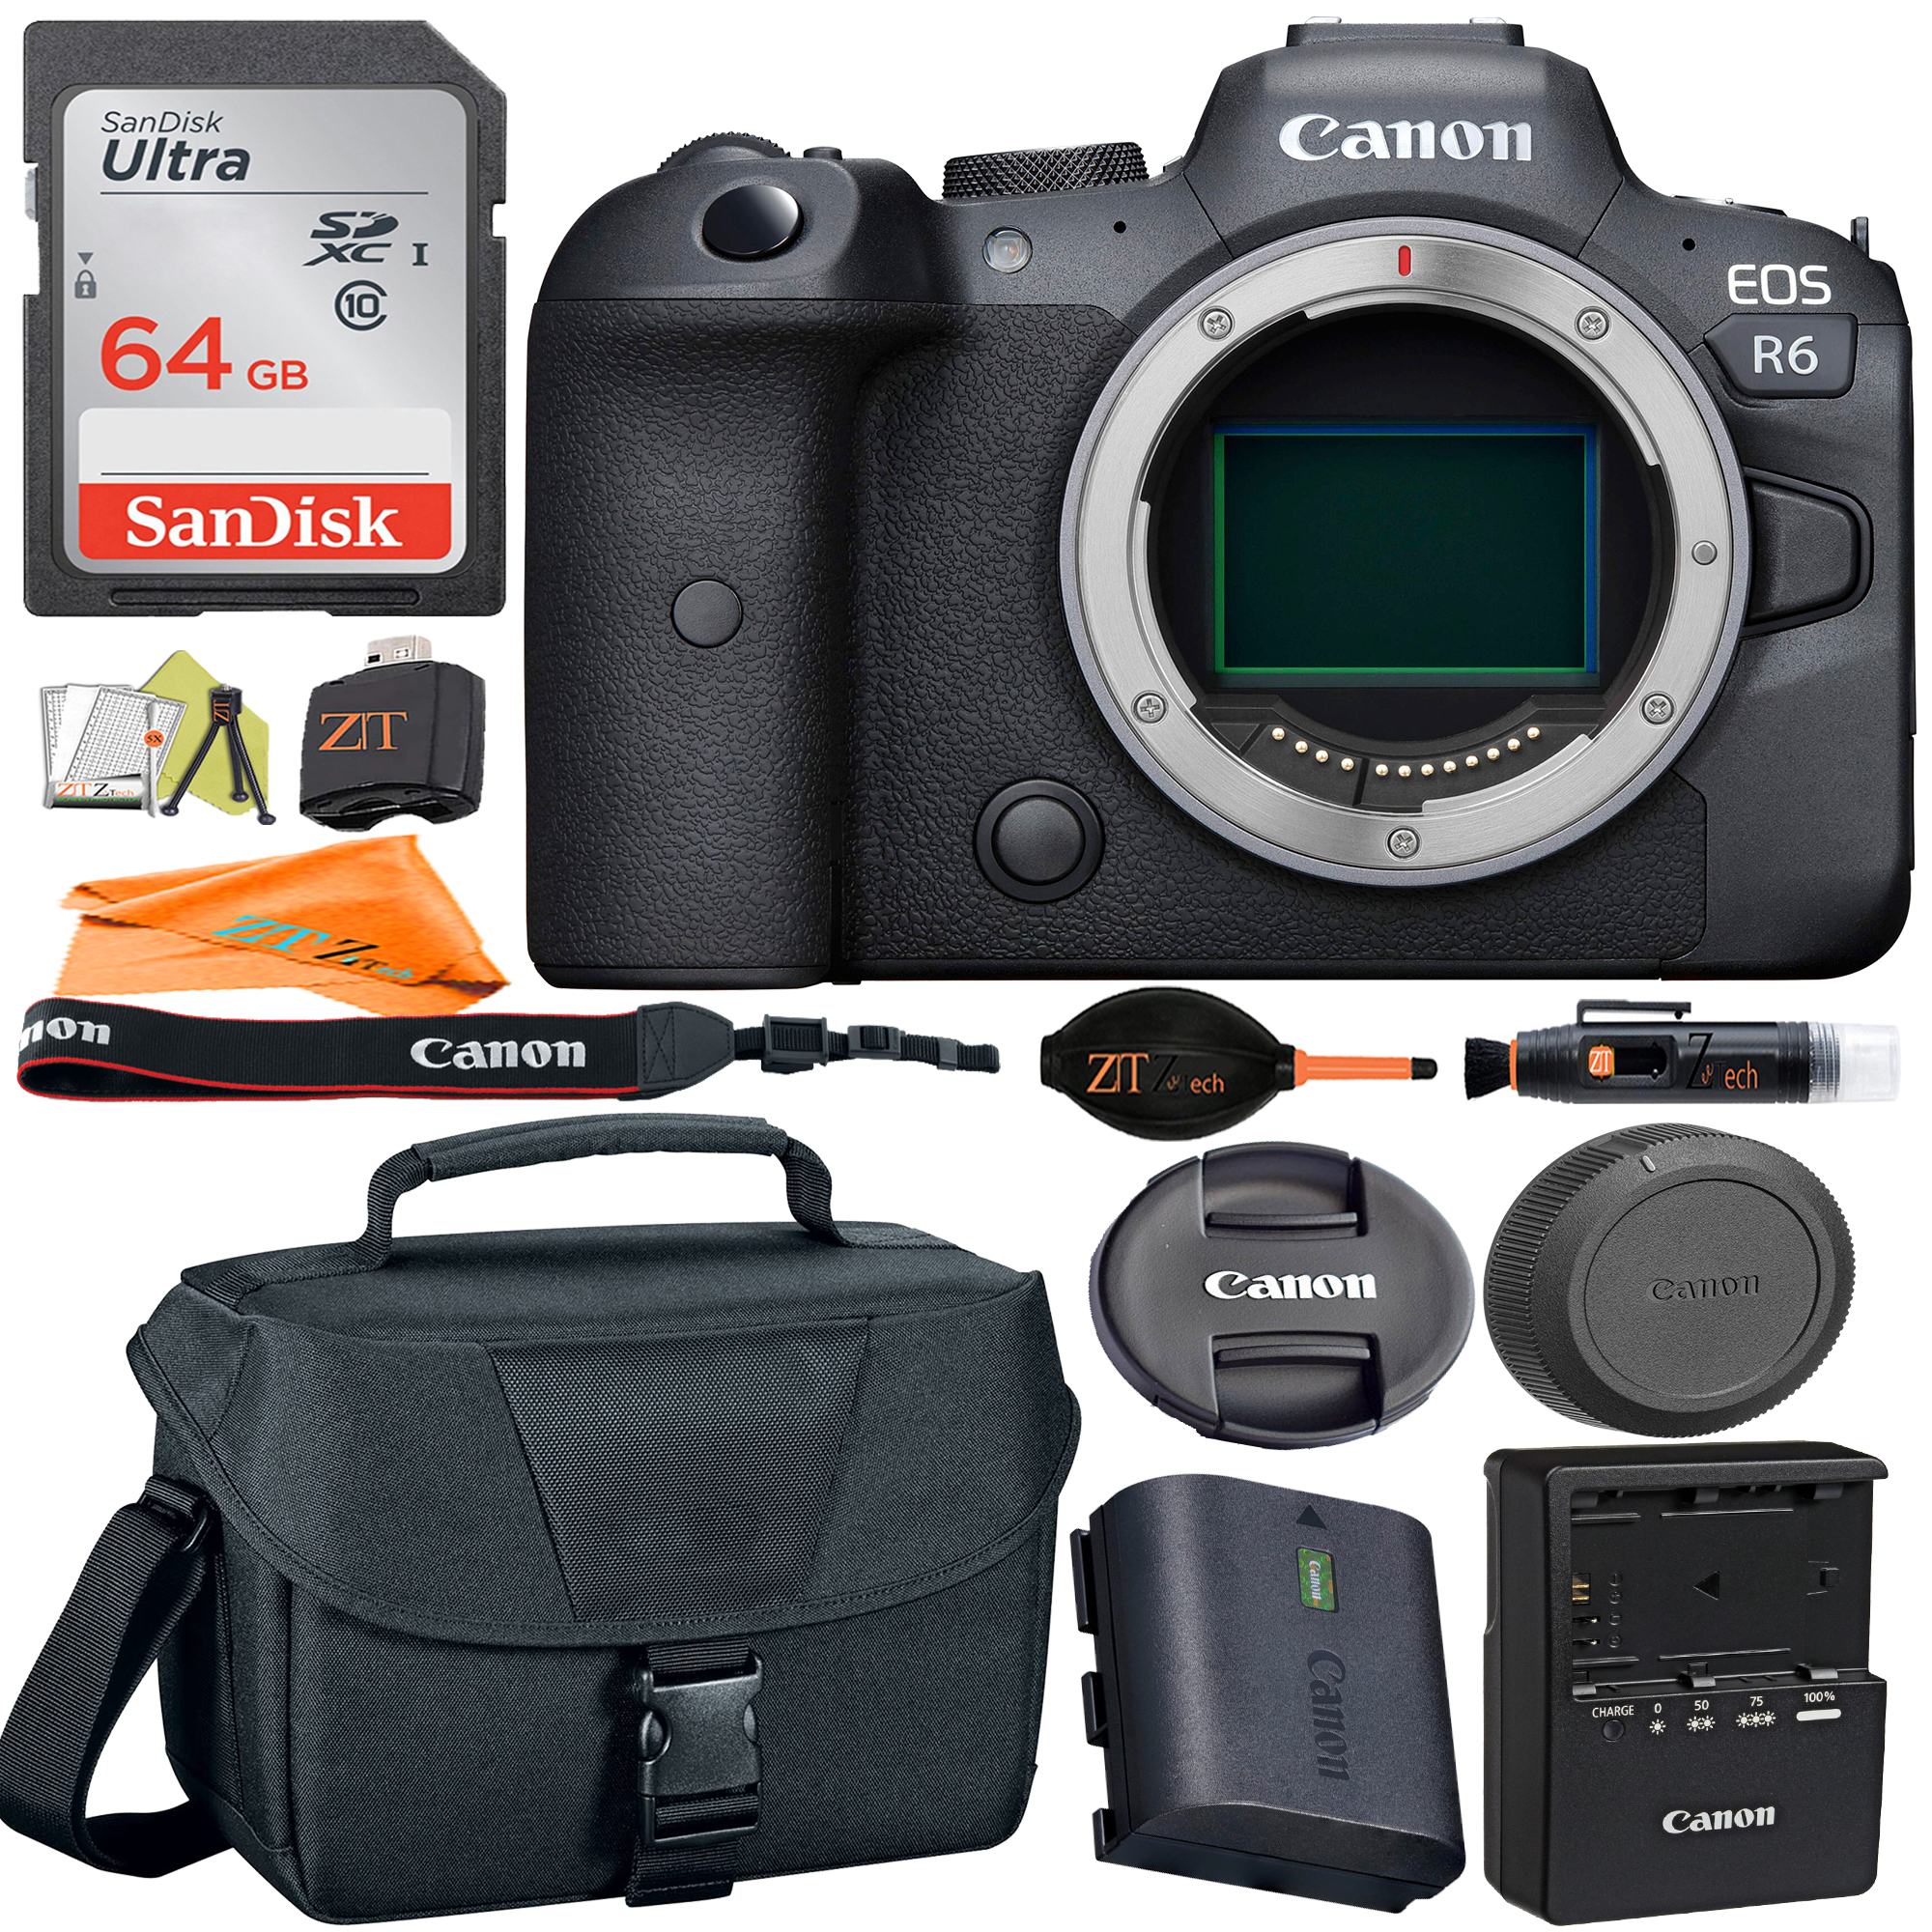 Canon EOS R6 Mirrorless Digital Camera (Body Only) 4K Video with SanDisk 64GB Memory Card + Case + ZeeTech Accessory Bundle